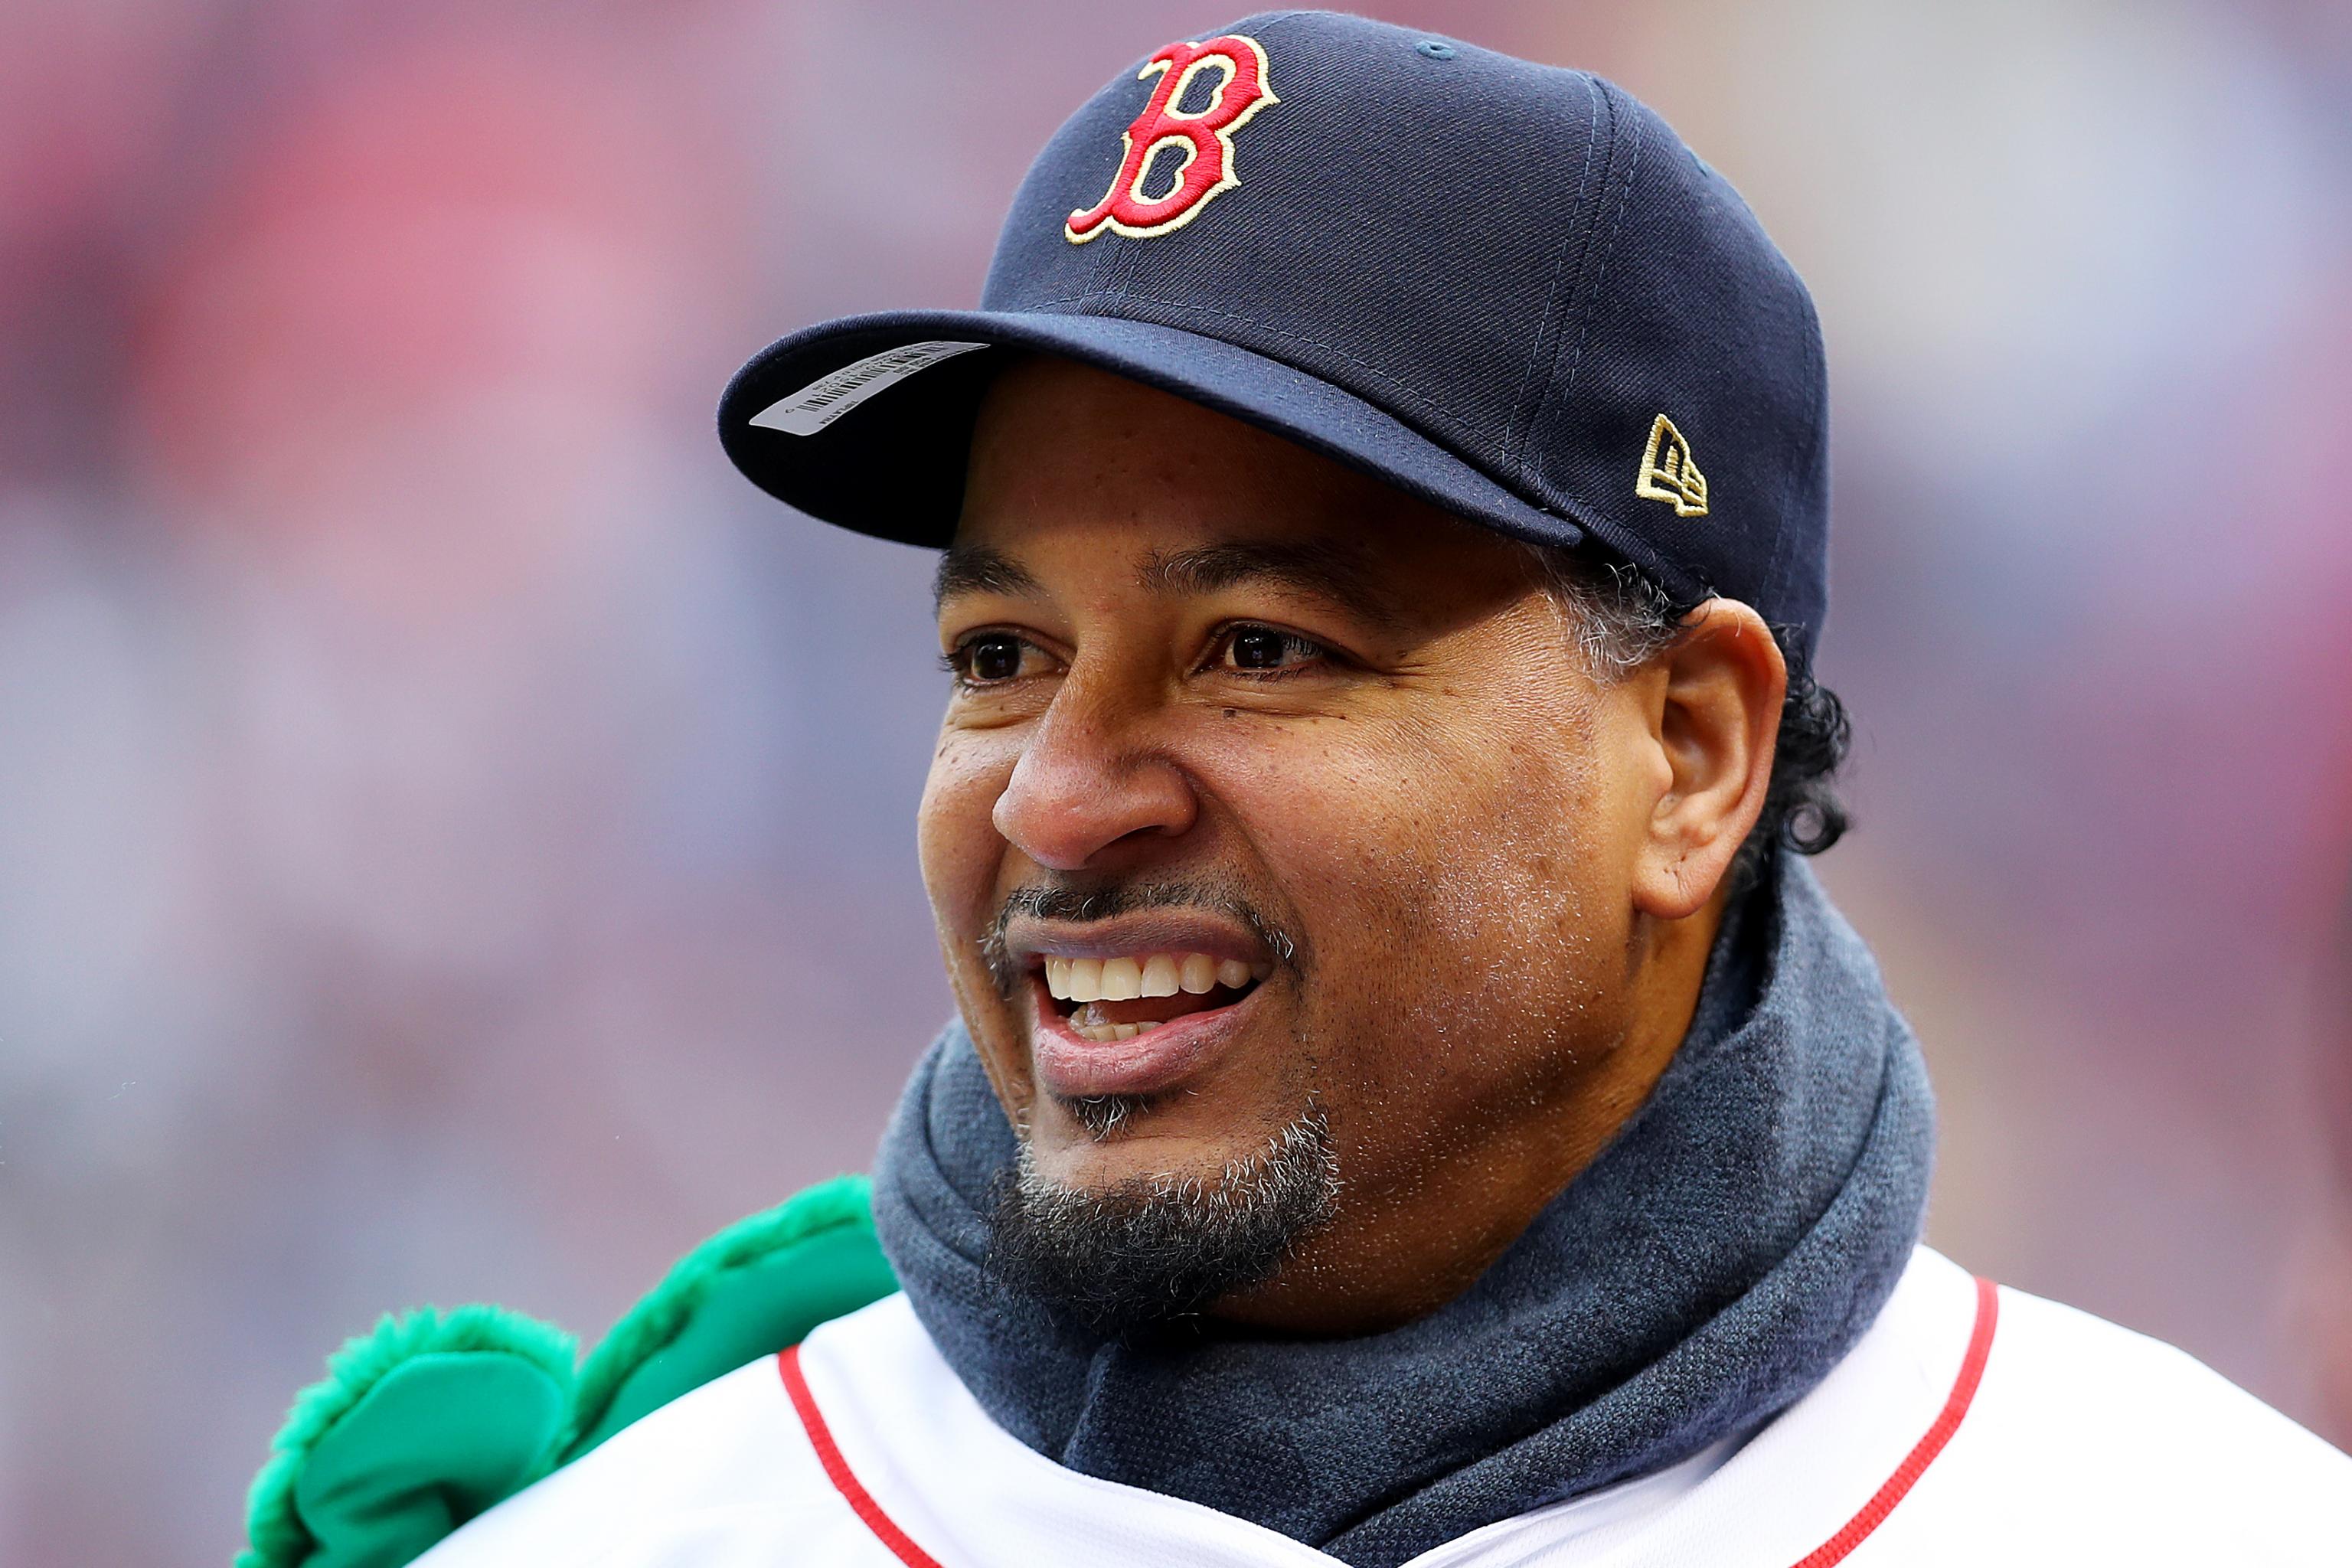 Former Dodgers Outfielder Manny Ramirez Hoping To Resume Career In